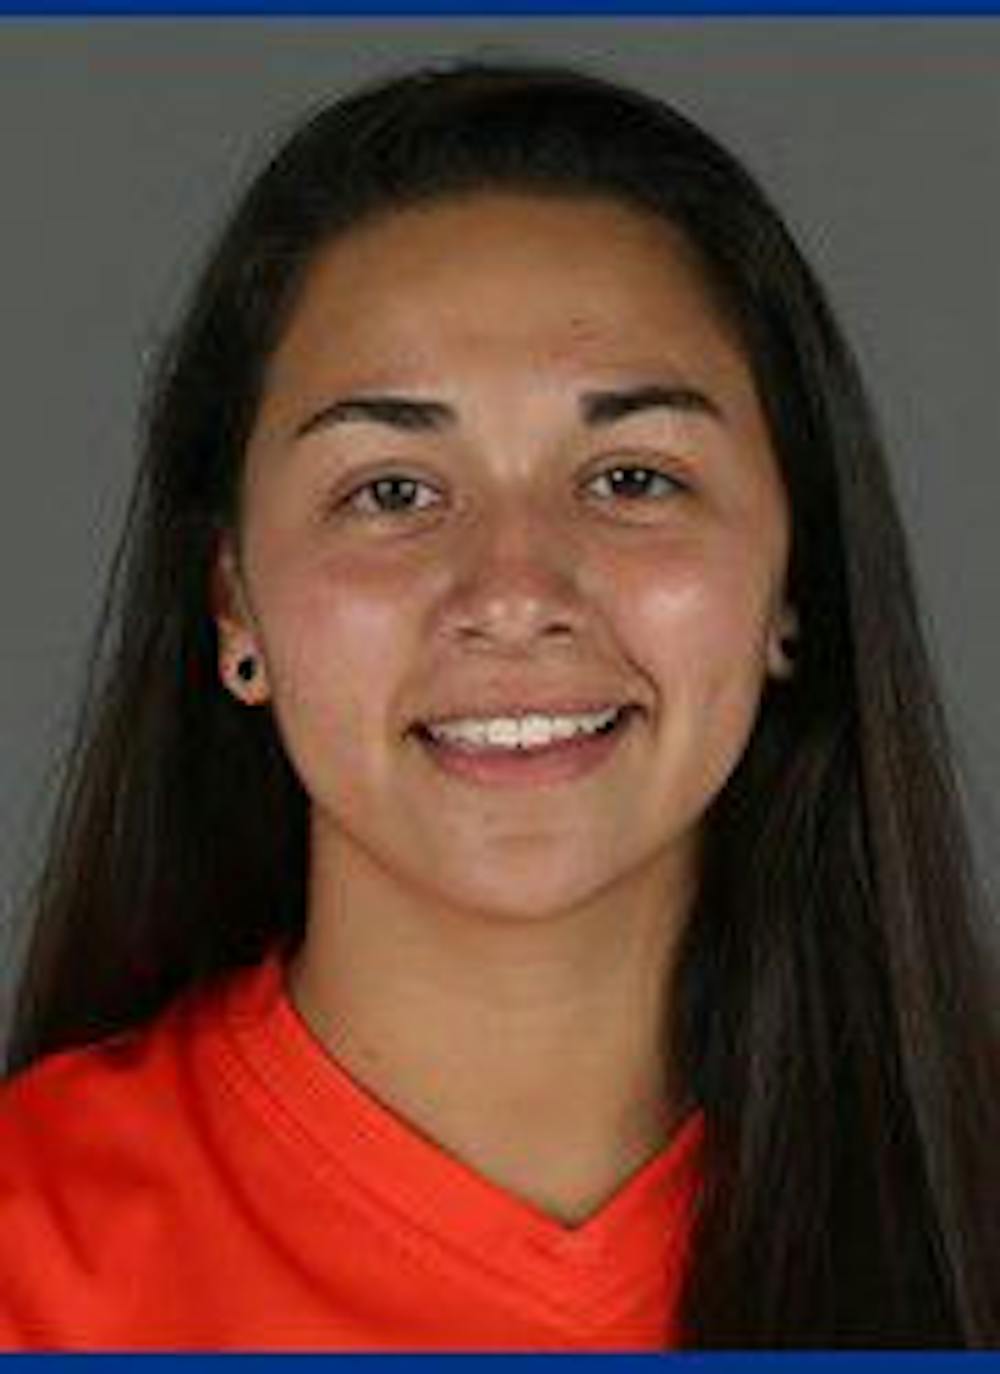 <p>UF goalkeeper Susi Espinoza has been a key part to Florida's 5-1 start to the 2017 campaign. In six games, she has a .778 save percentage.&nbsp;</p>